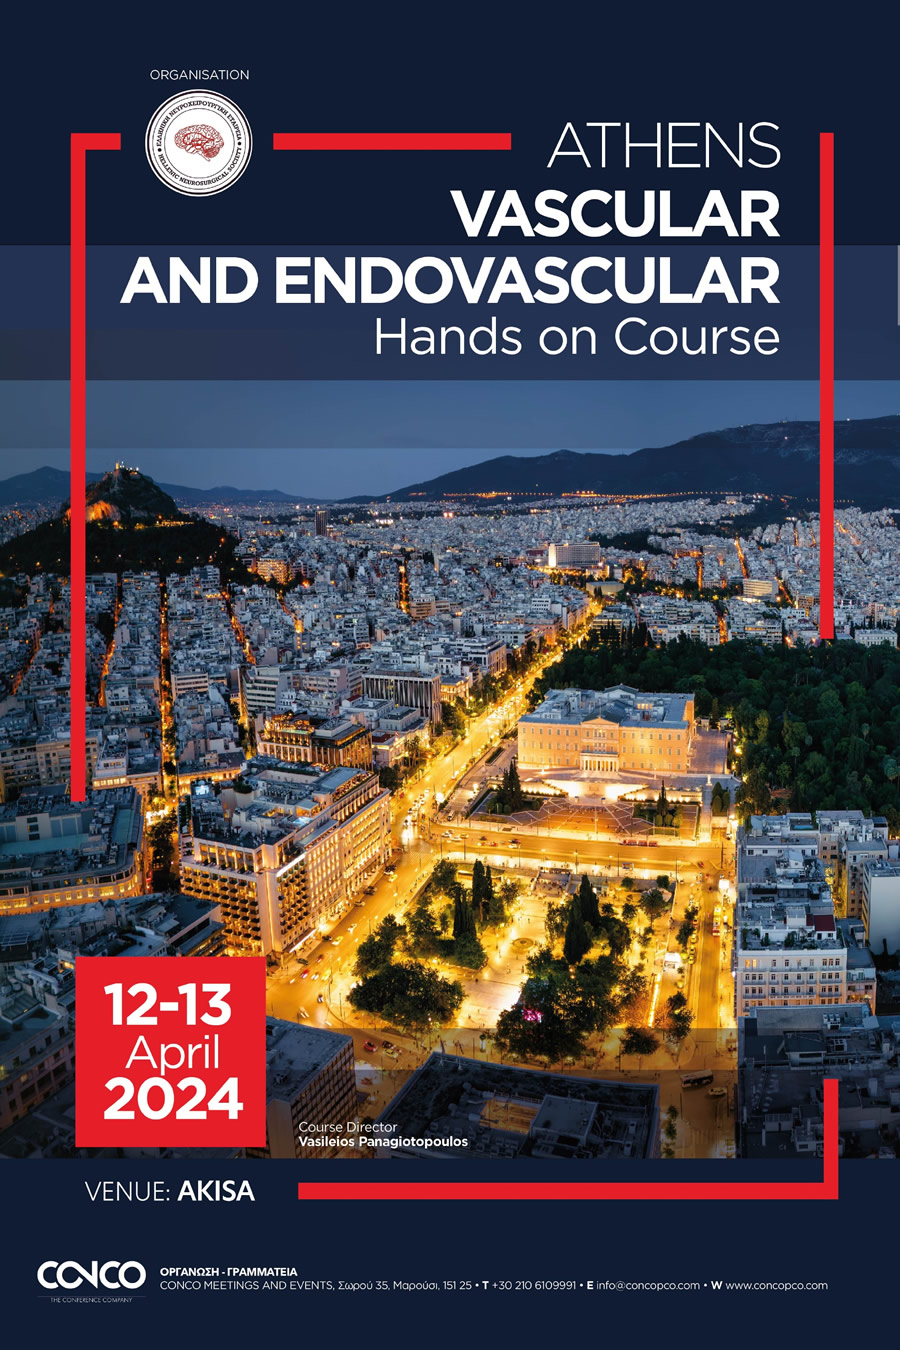 Athens Vascular and Endovascular Hands On Course